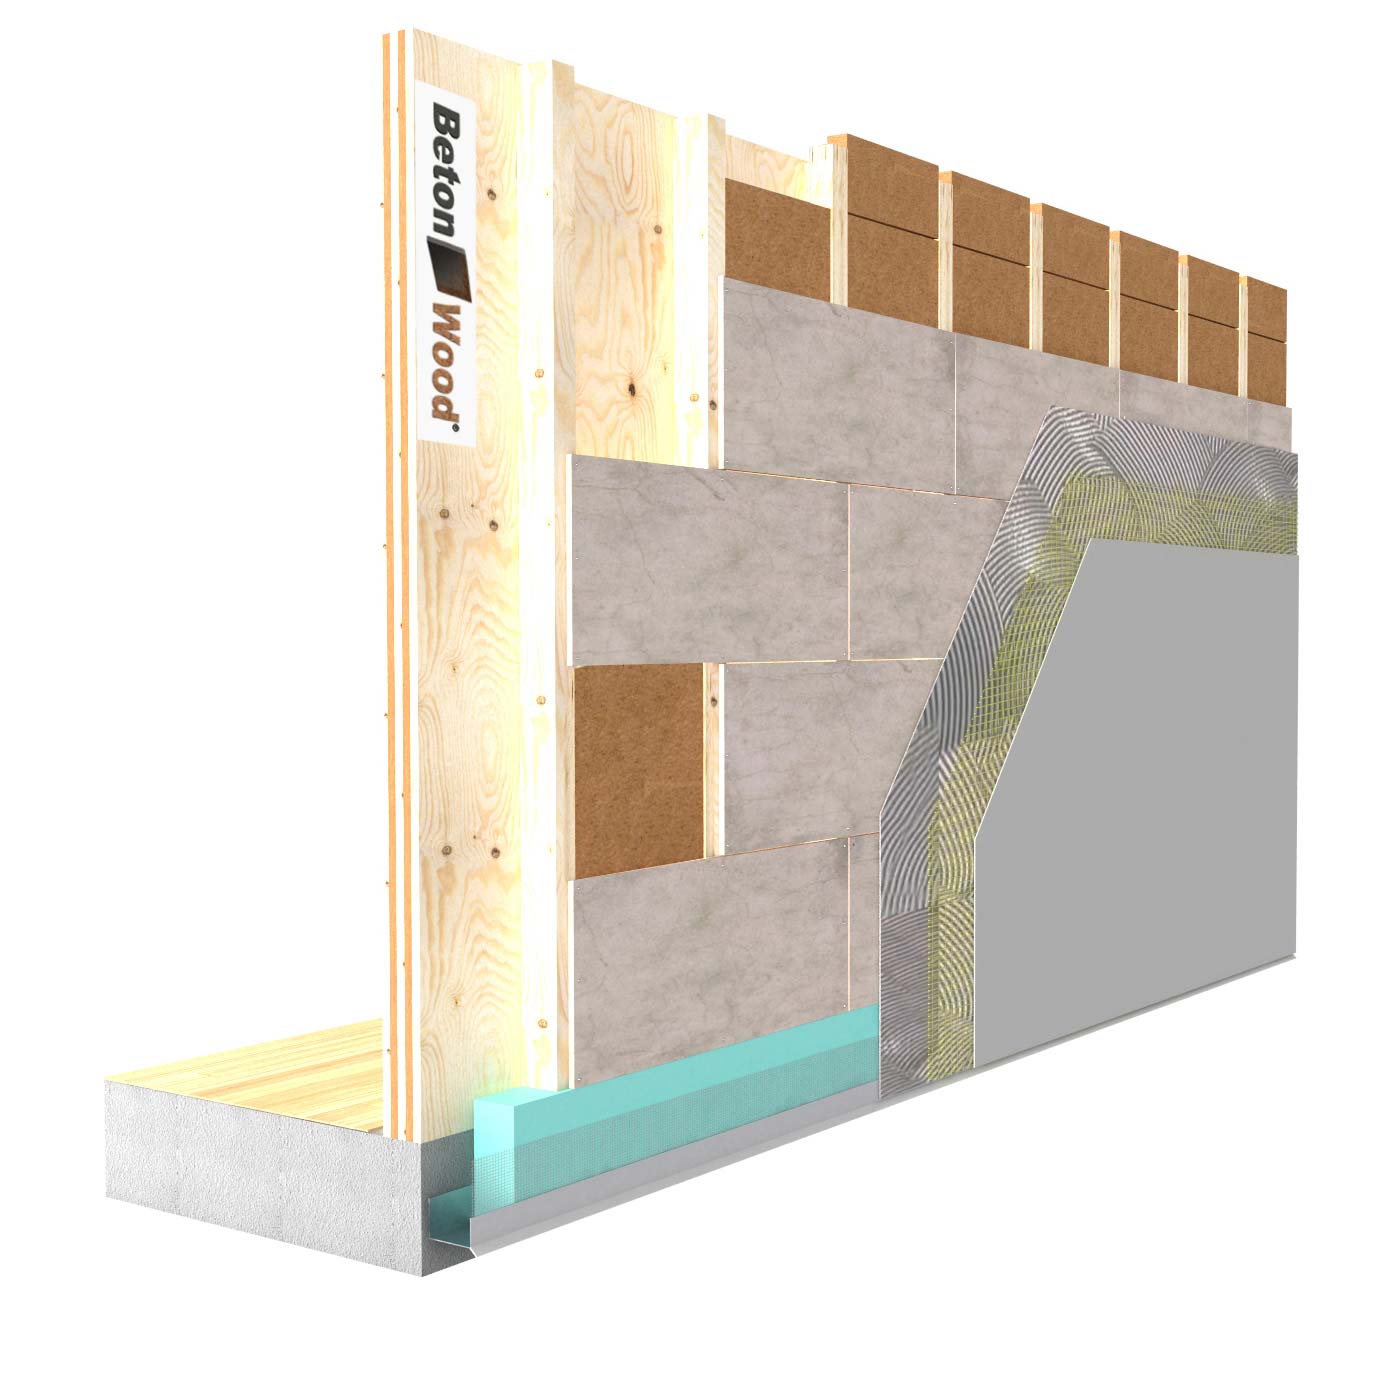 External insulation system with Therm wood fiber on wooden walls